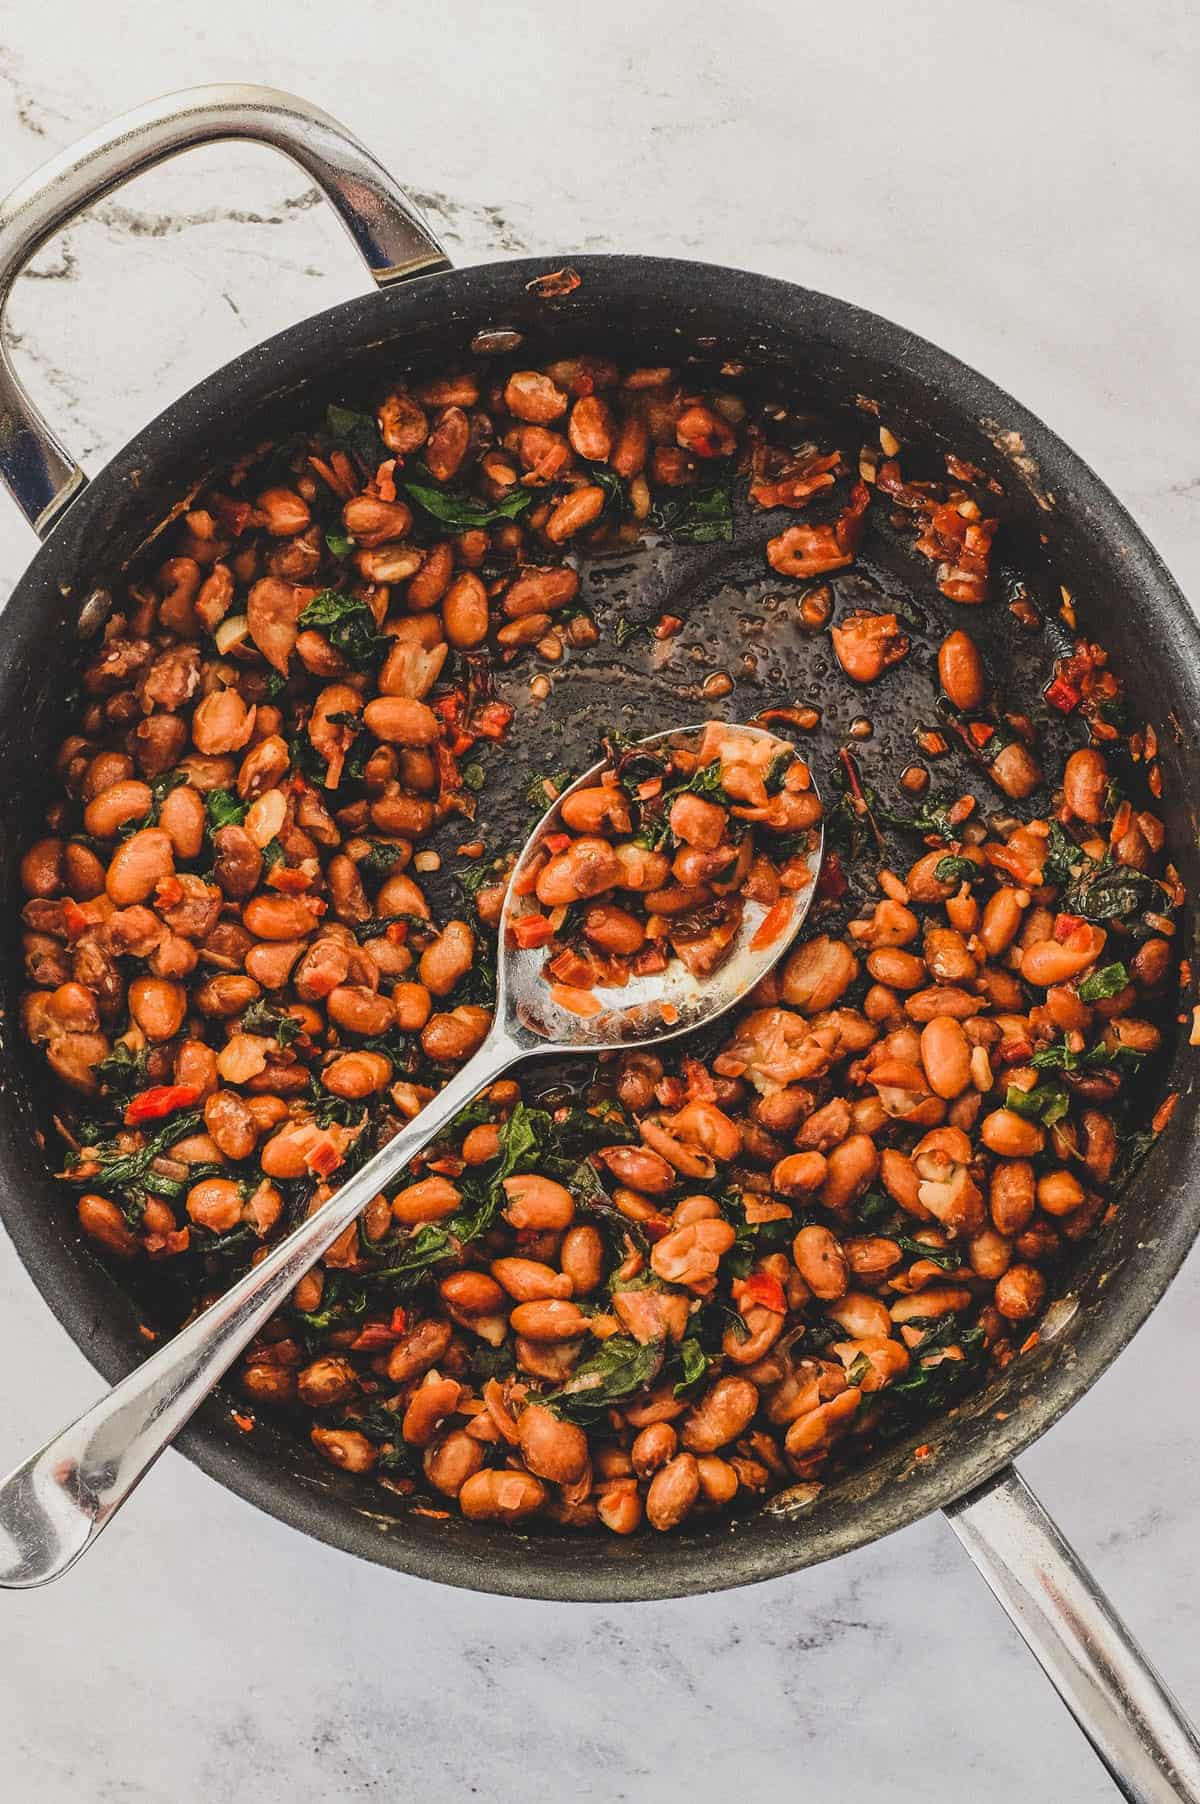 Borlotti beans cooked with chard (silverbeet) served from a pan